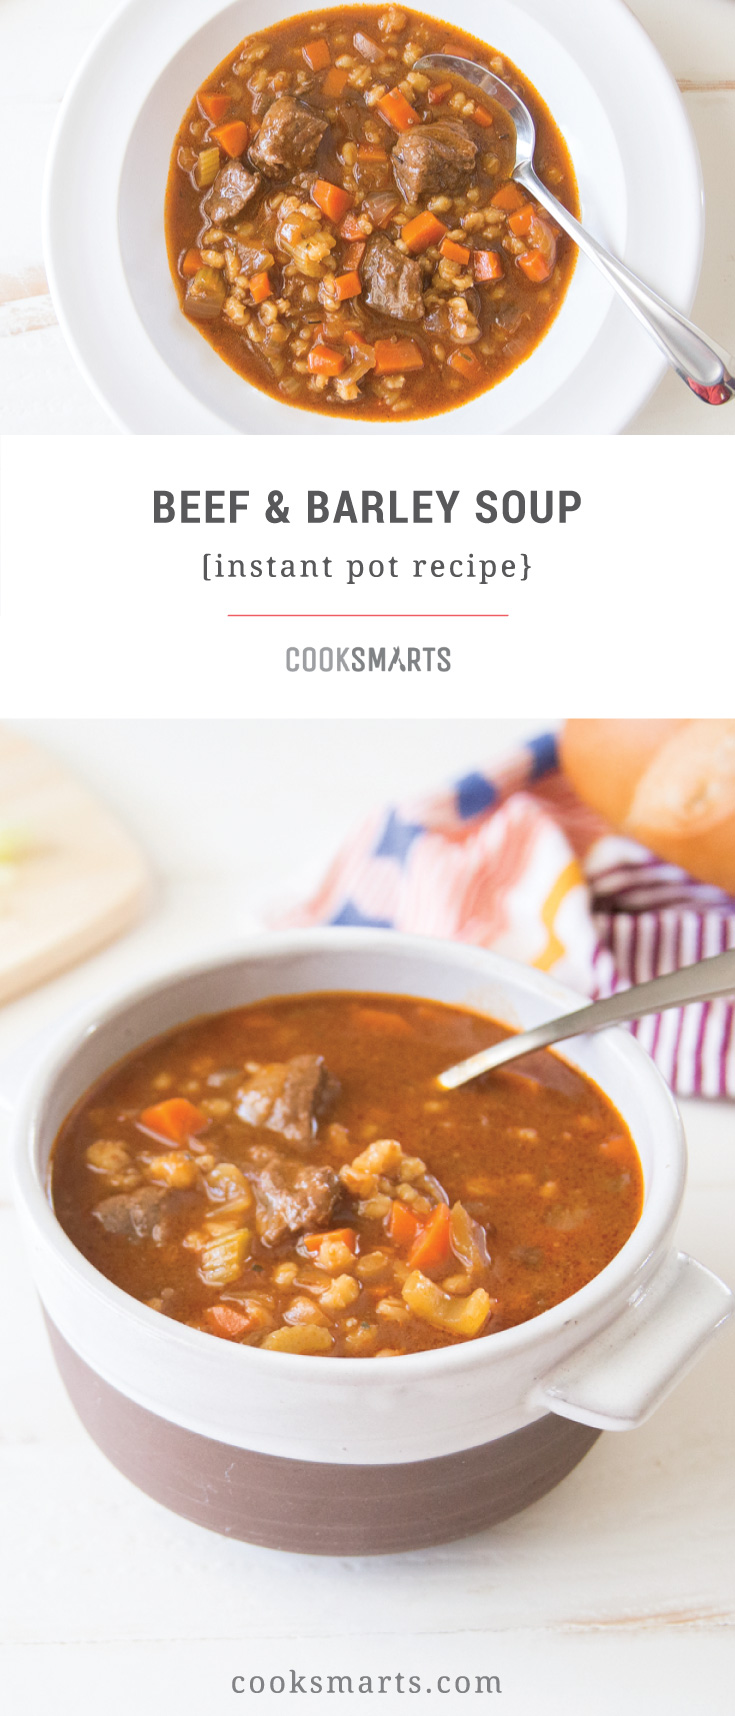 Instant Pot Beef and Barley Soup Recipe | Cook Smarts